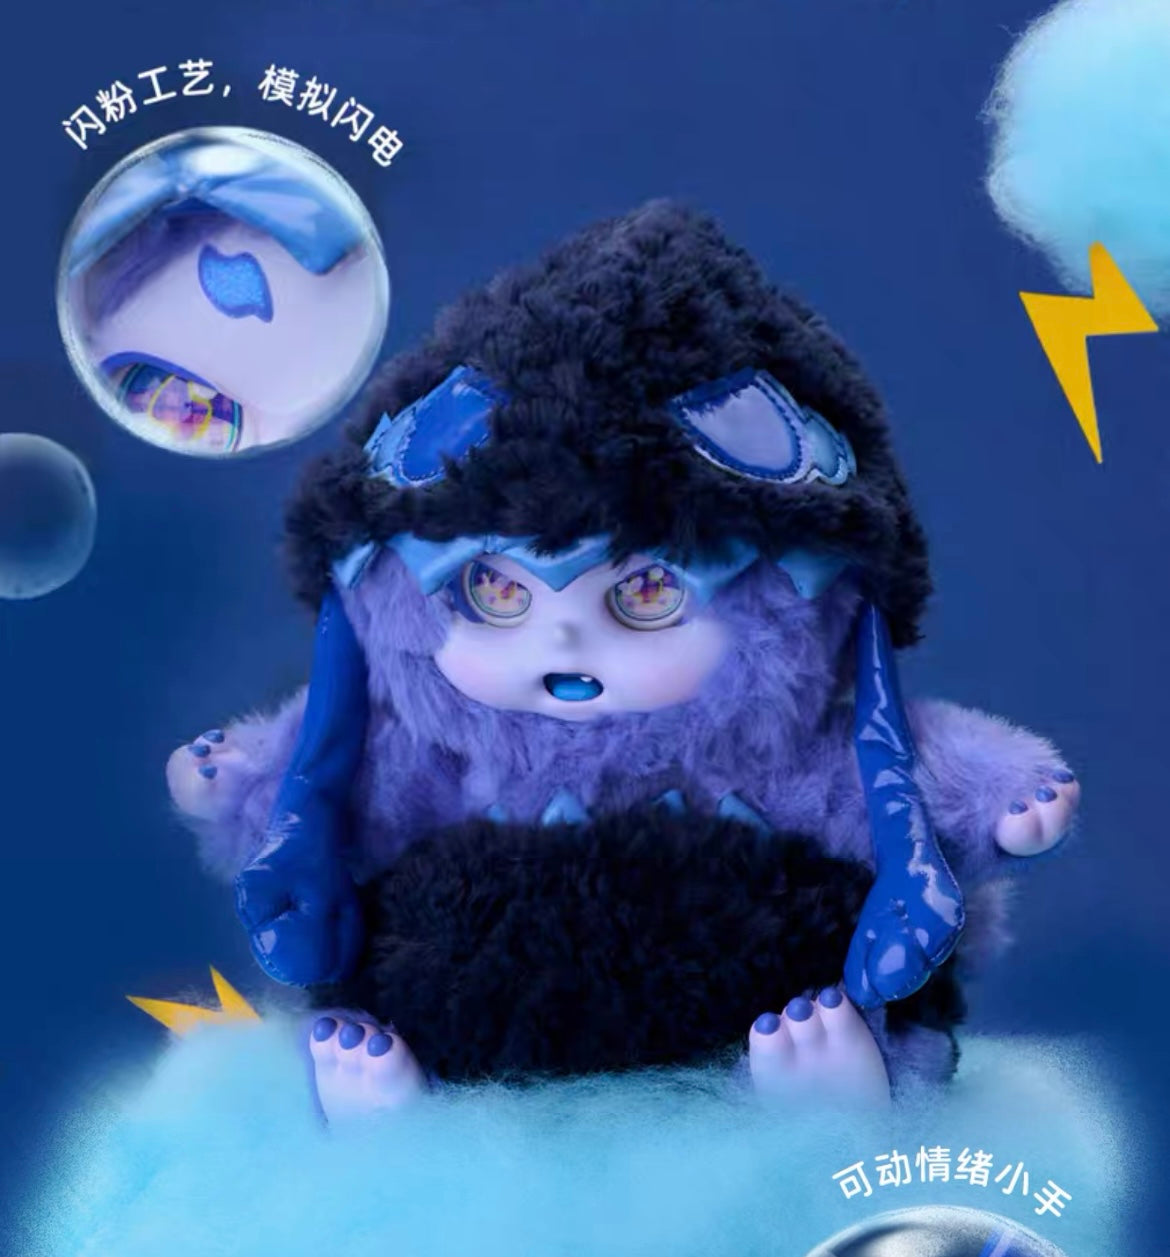 【PREORDER】Cino Ever Changing Moods Fluffy Plush